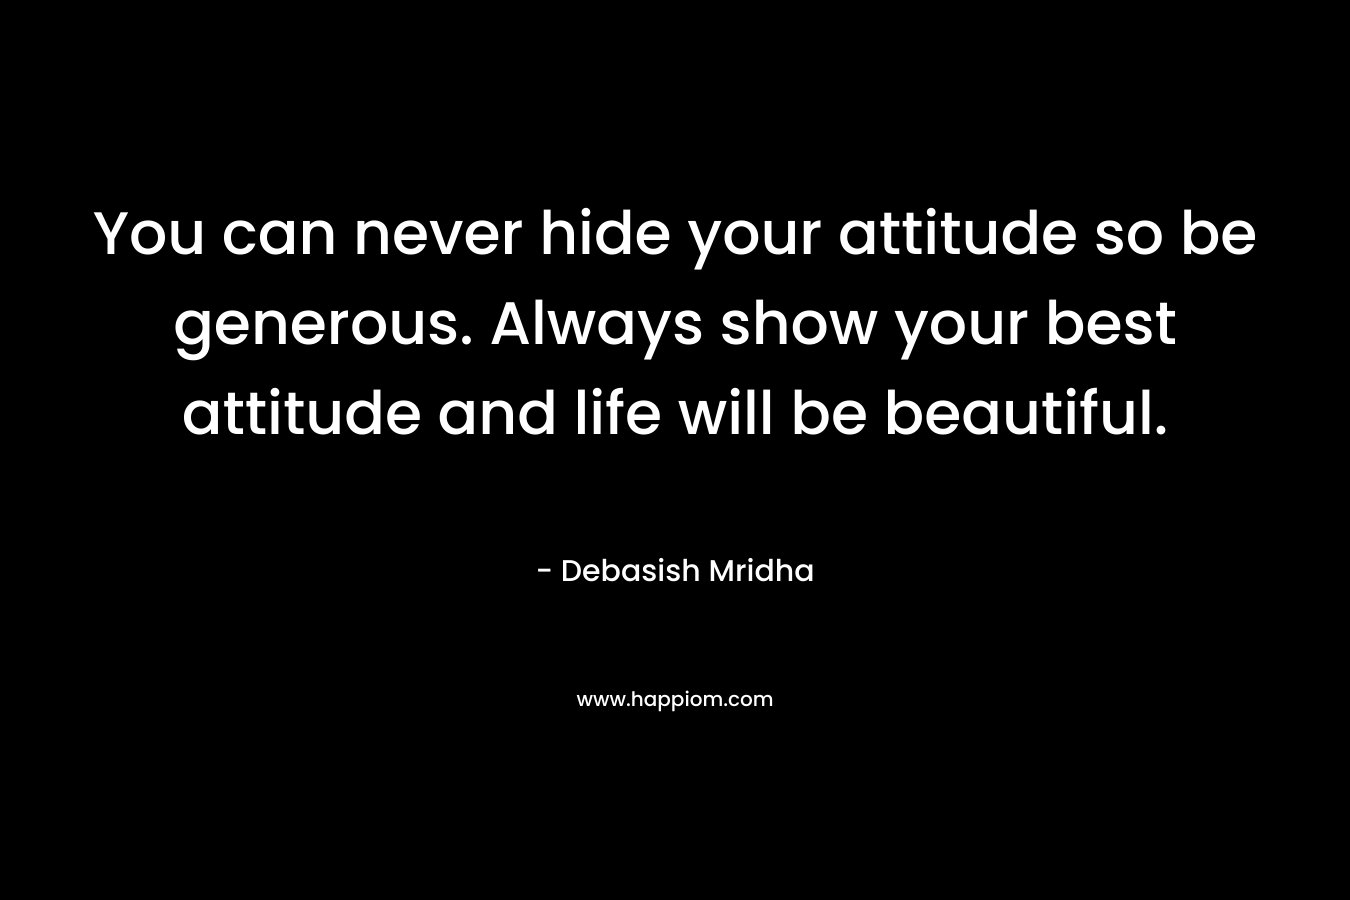 You can never hide your attitude so be generous. Always show your best attitude and life will be beautiful.